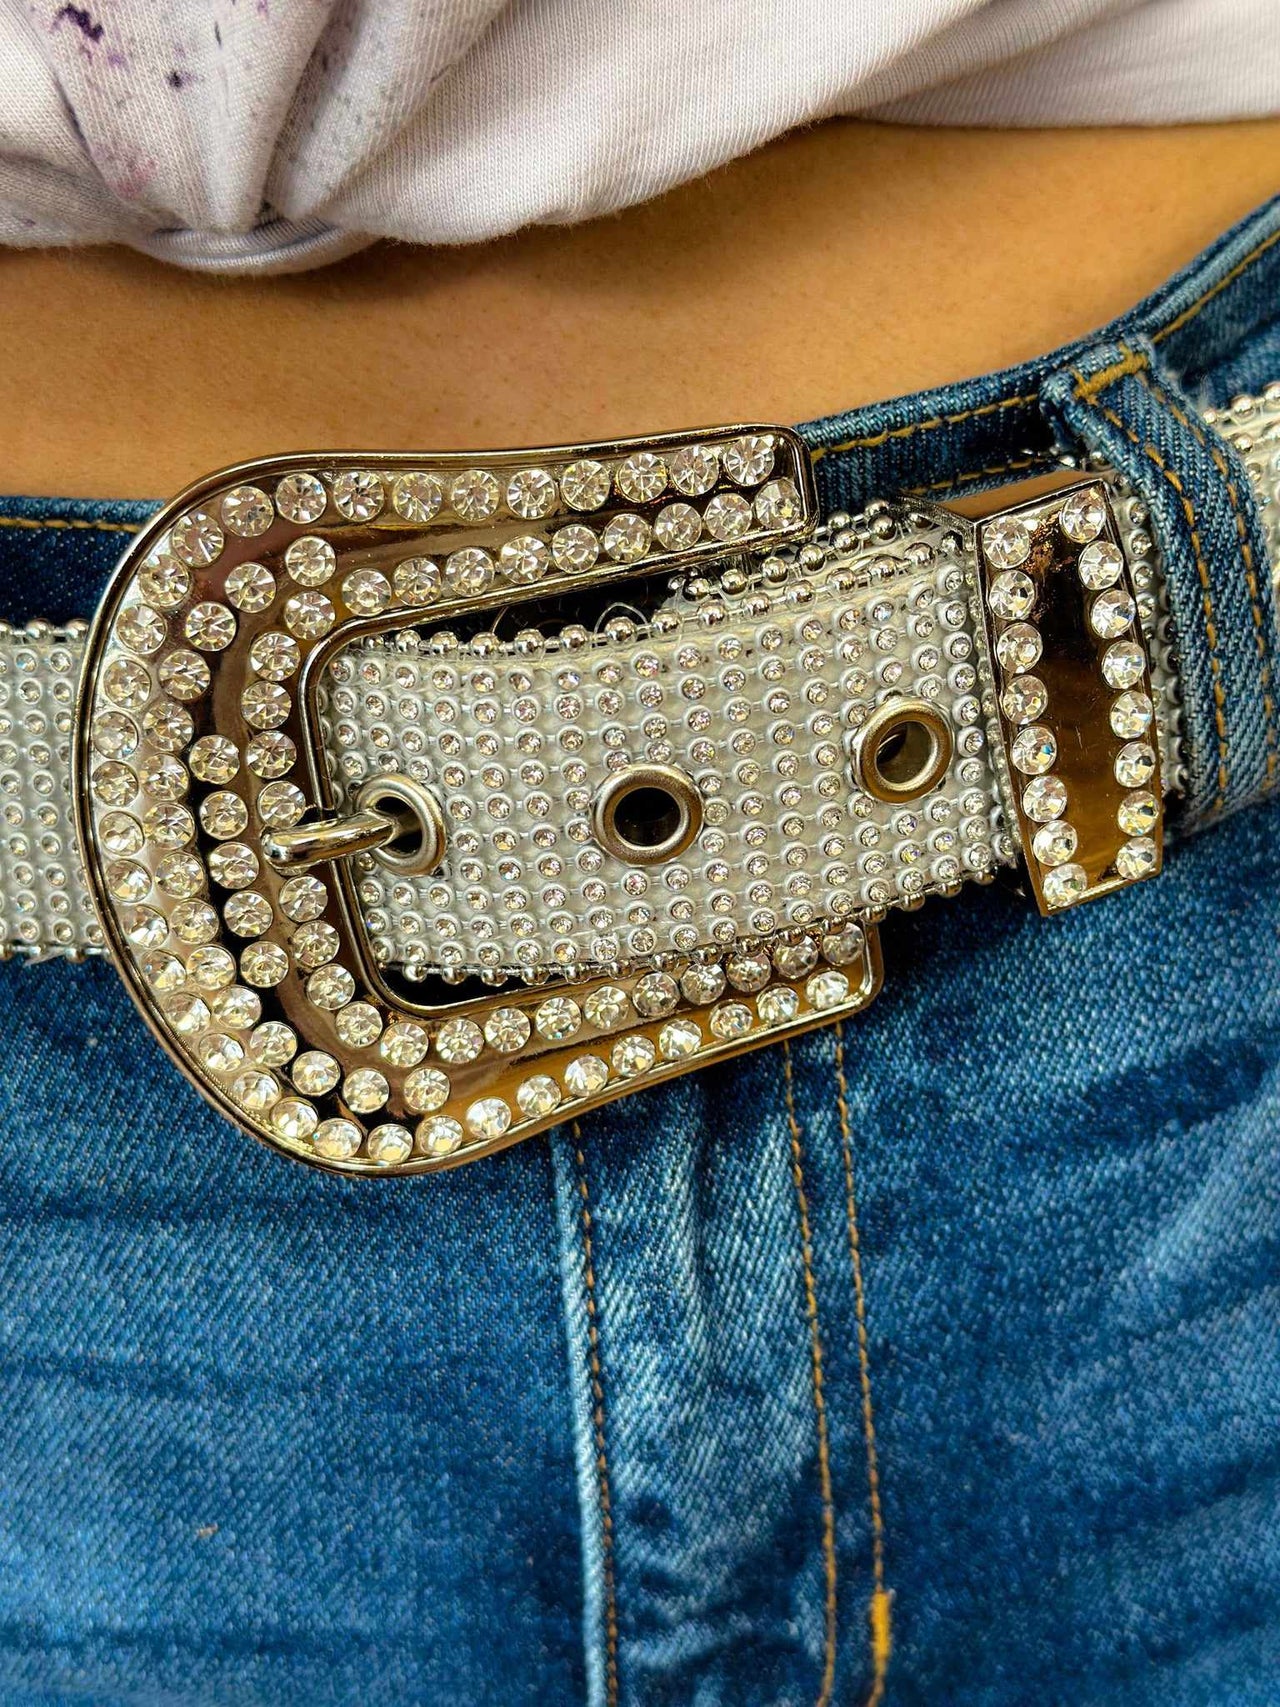 Accessories, Belt Western Rhinestone Belts Bling White Cowgirl Rodeo Party  Sparkly Belt